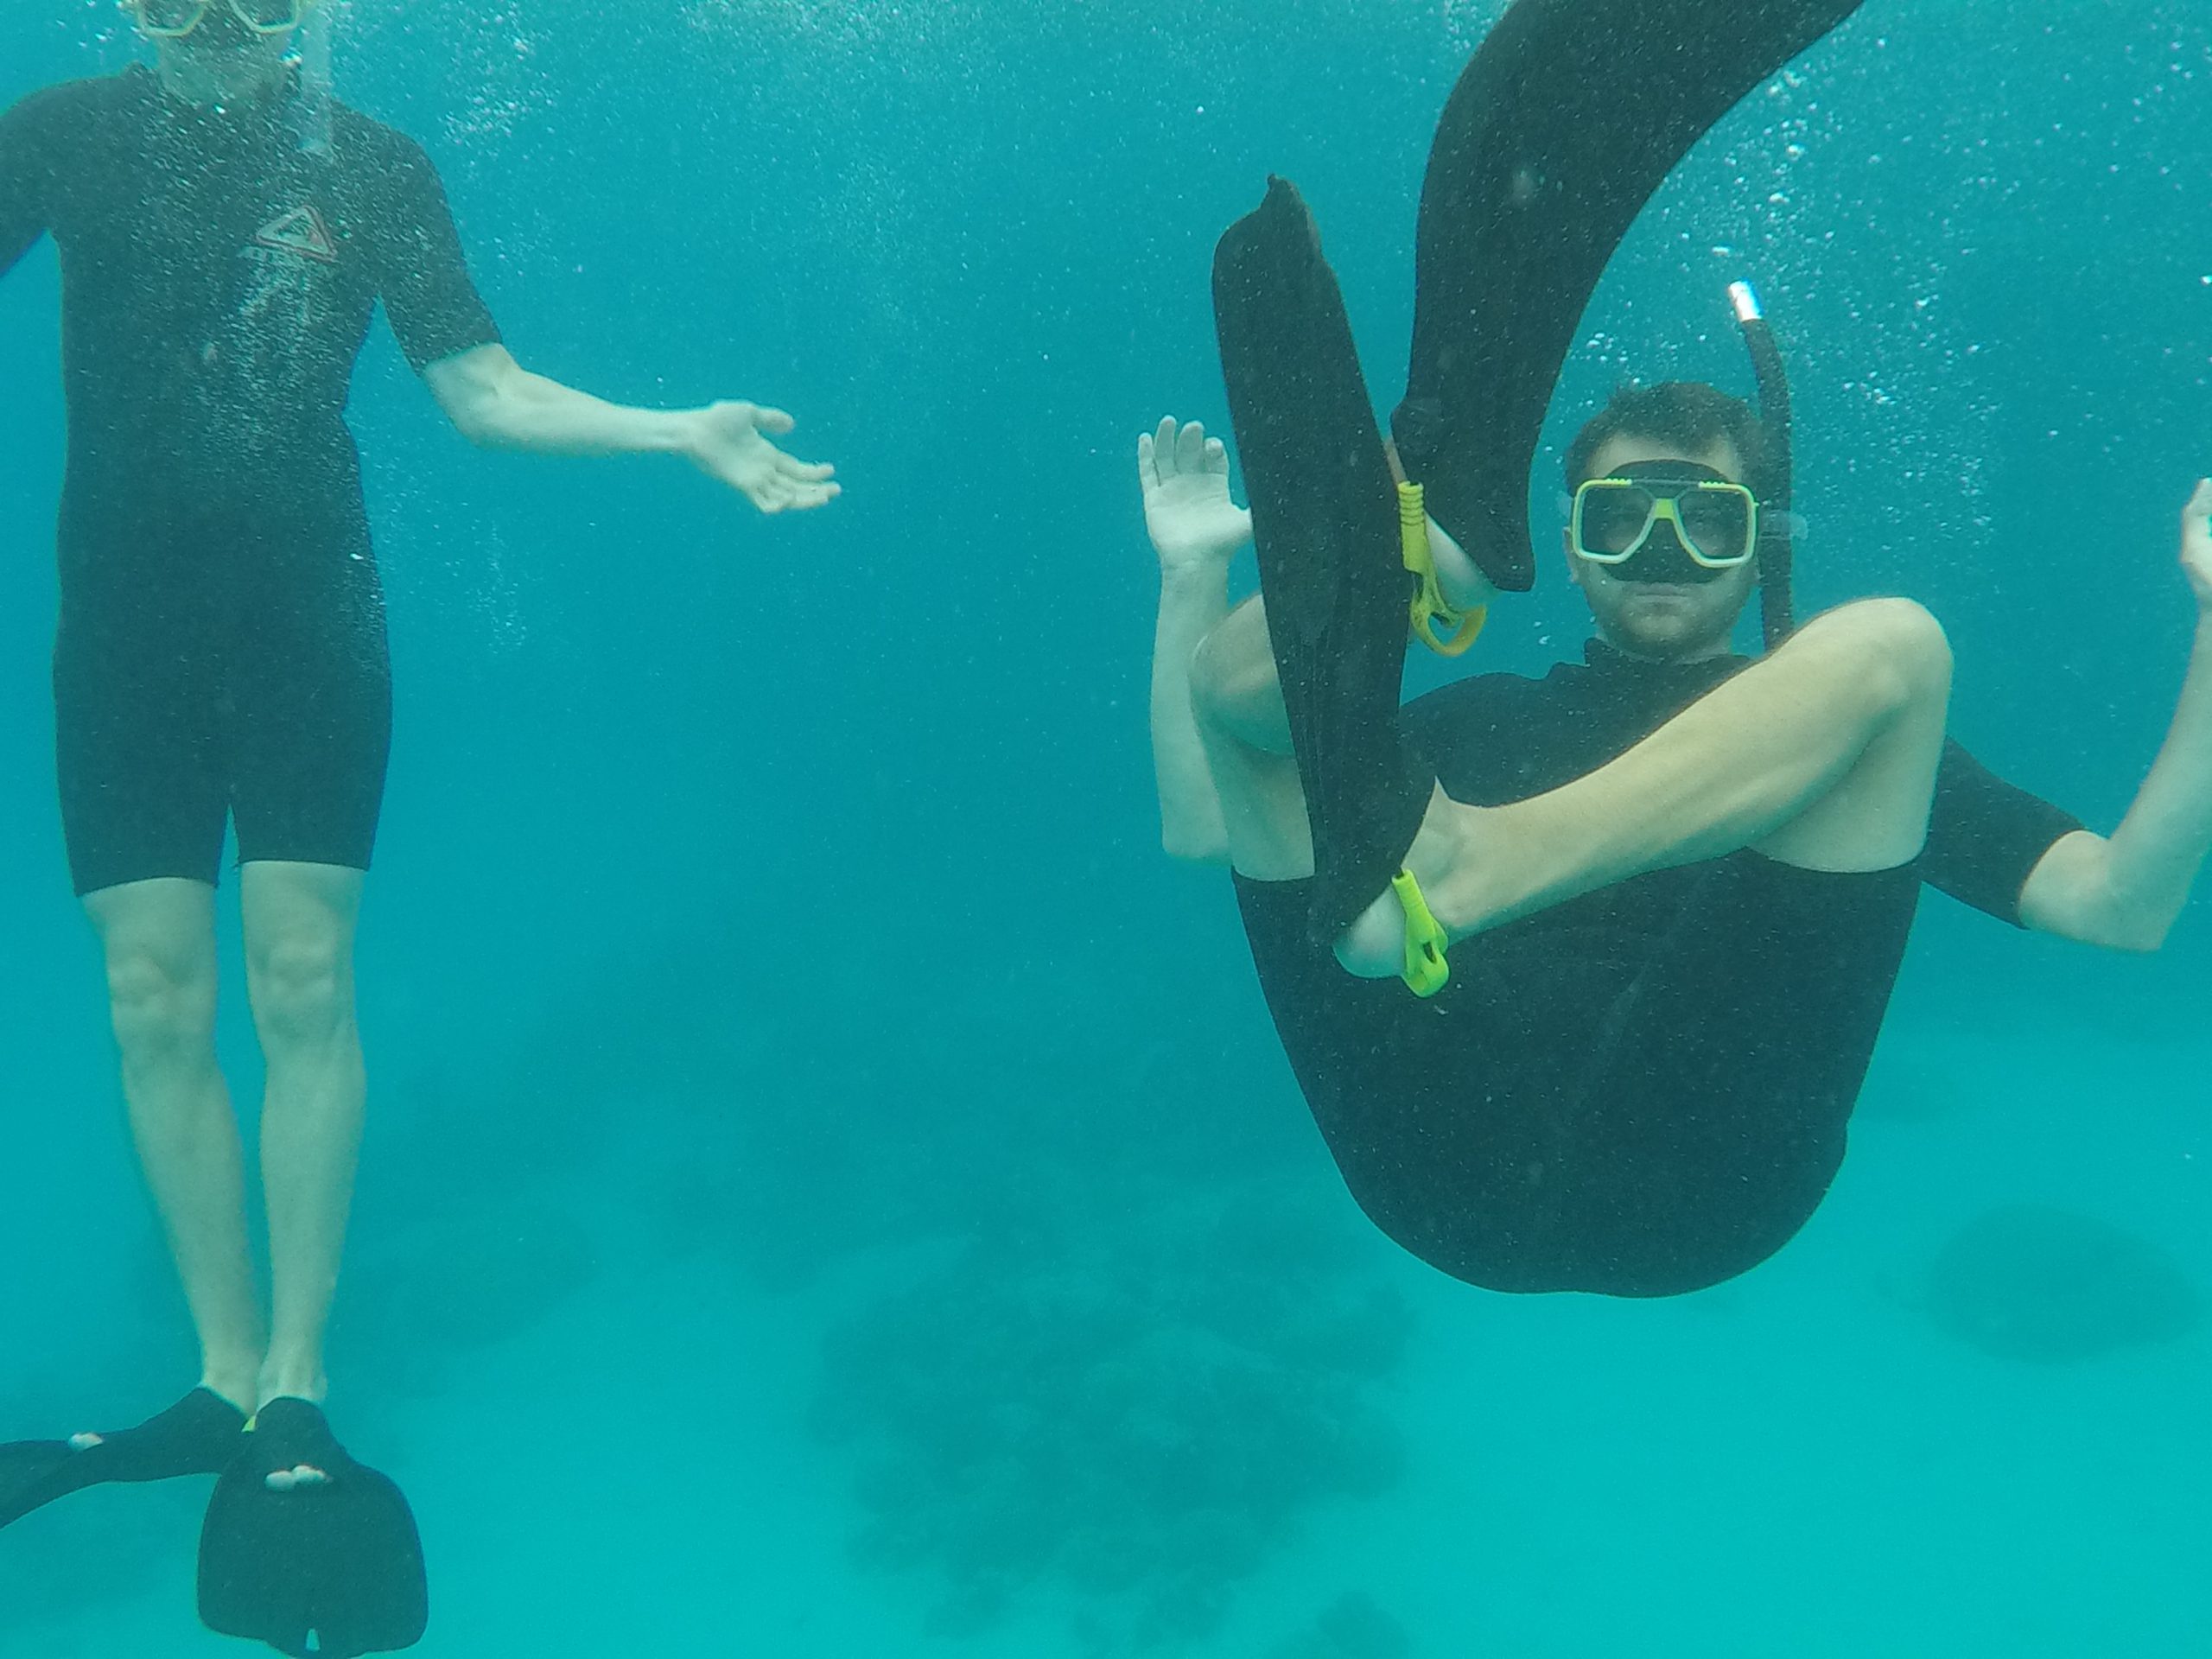 Snorkeling at the Great Barrier Reef with Passions of Paradise